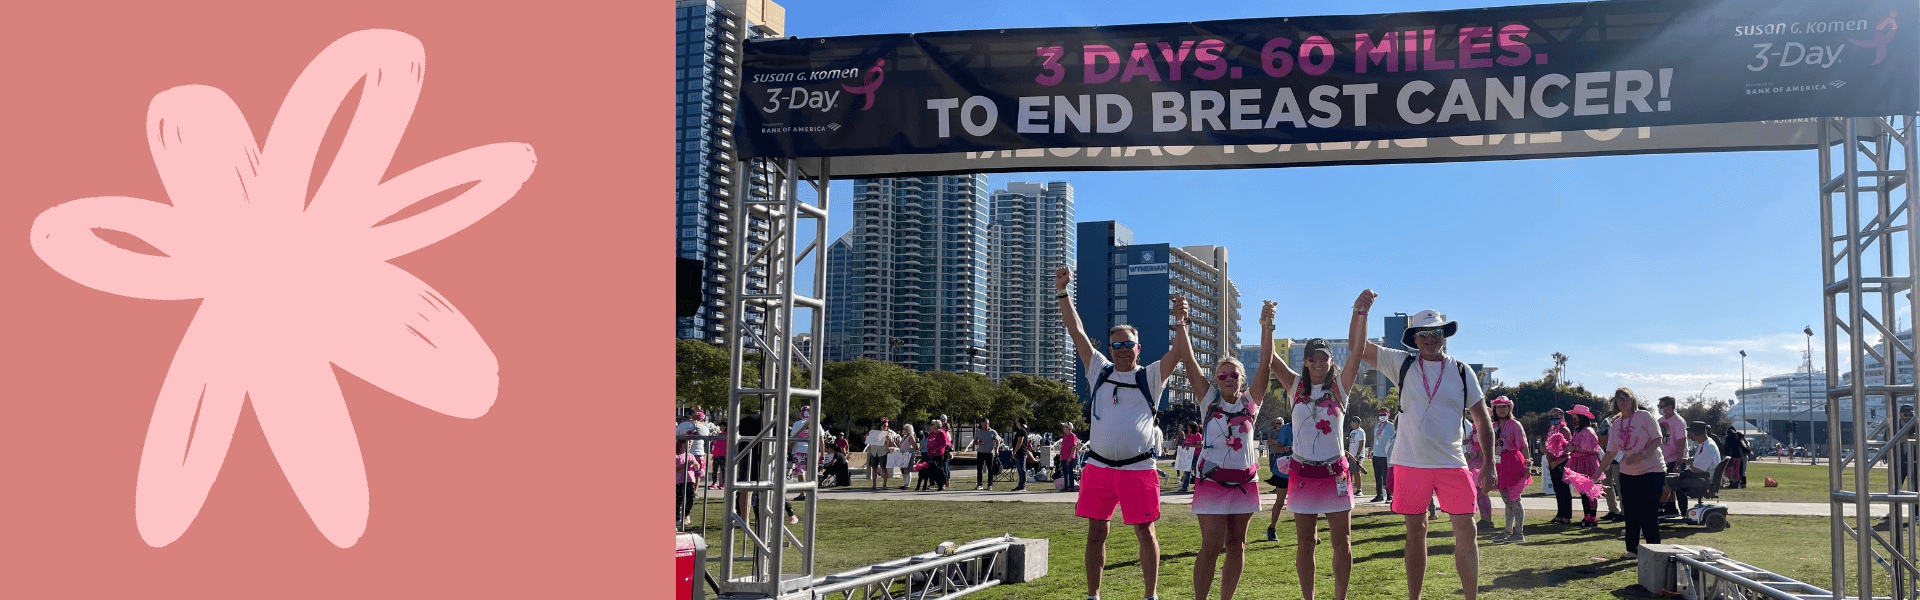 Three day Walk For the Cure - San Diego, CA